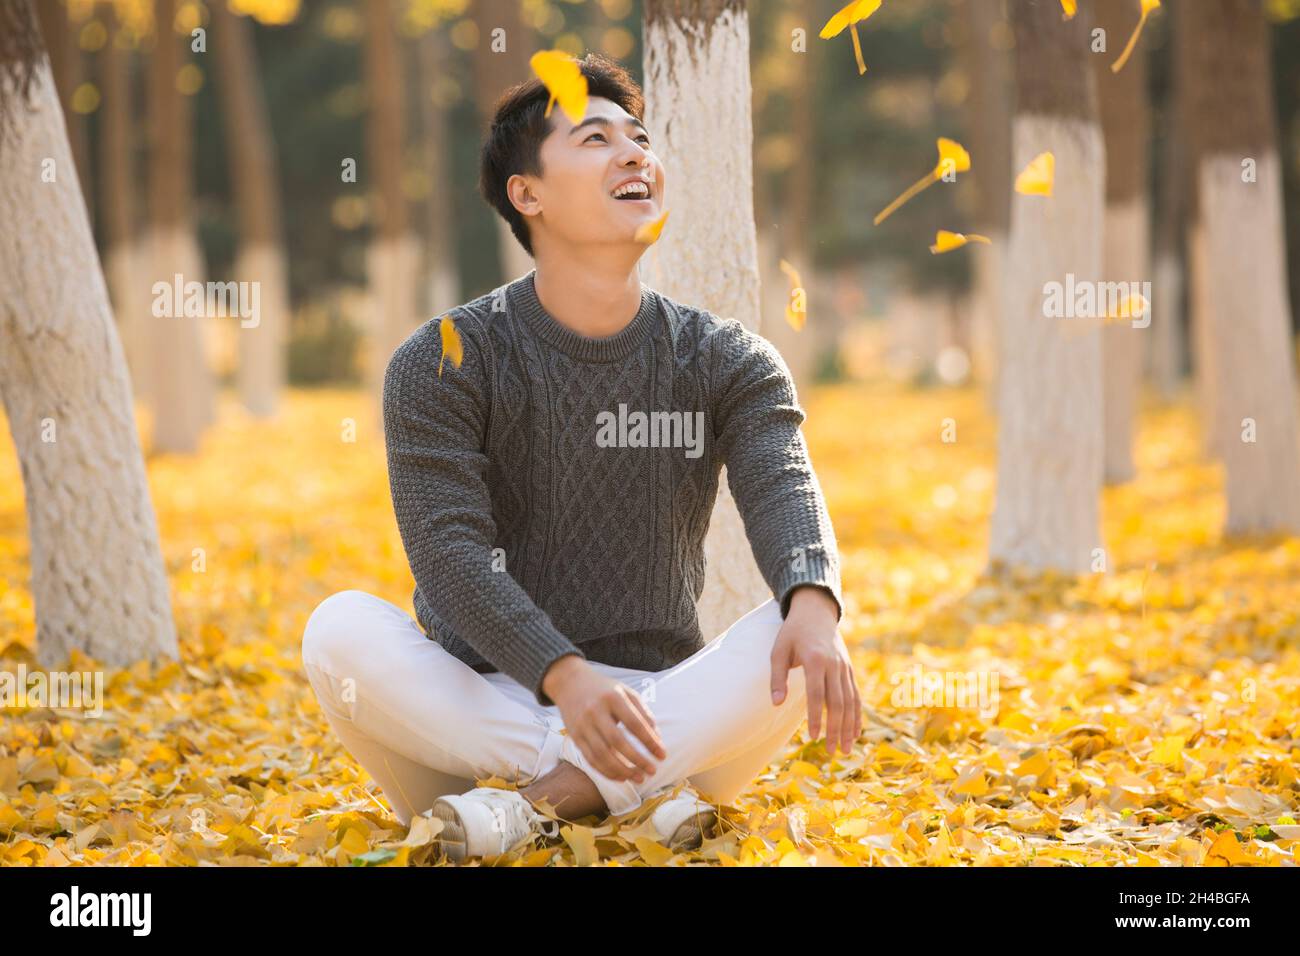 Happy and handsome young man Stock Photo